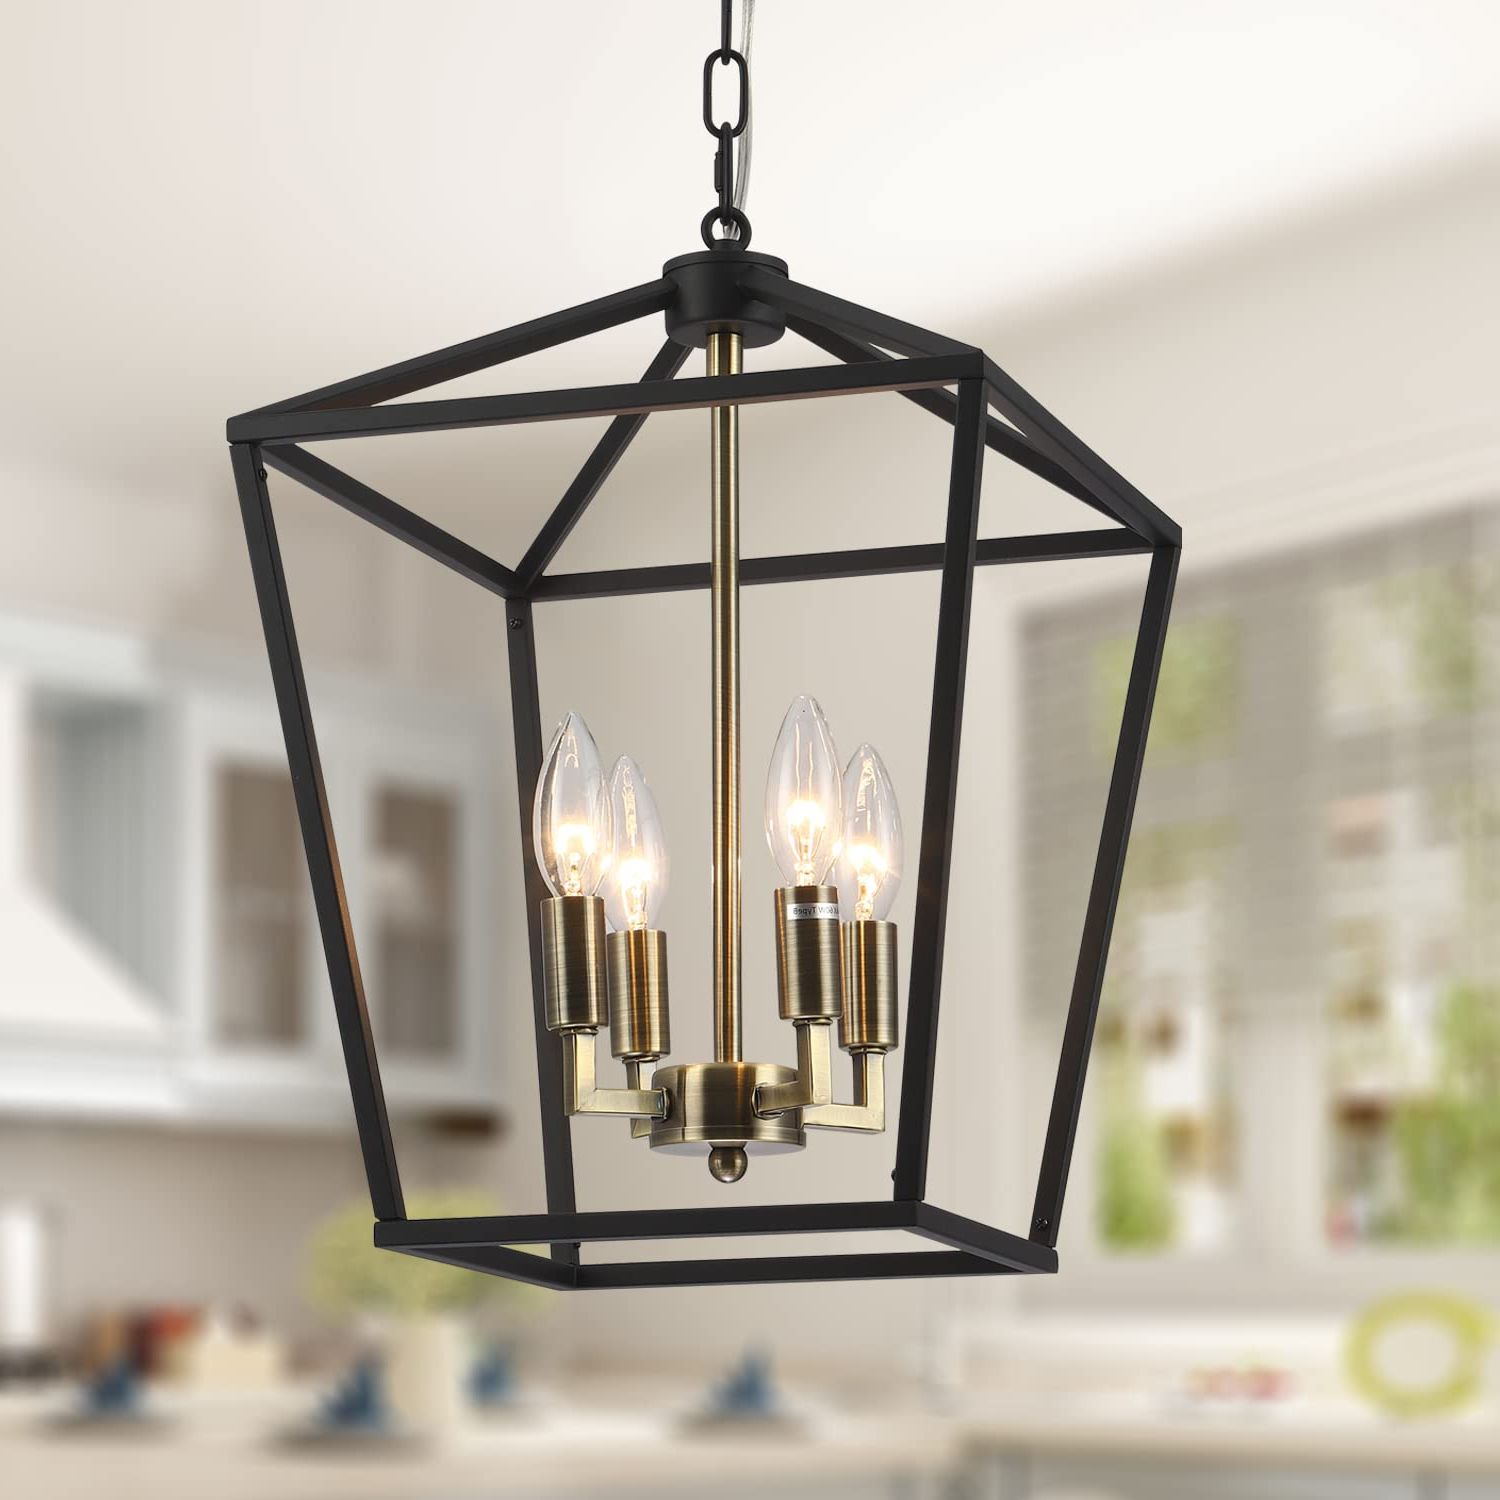 Well Known Black Farmhouse Chandelier For Dining Room Kitchen Entryway 4 Light Rustic  Farmhouse Pendant Light Fixtures, Industrial Cage Lantern Hanging Lighting  With E12 Base – – Amazon Throughout Rustic Black Lantern Chandeliers (View 4 of 15)